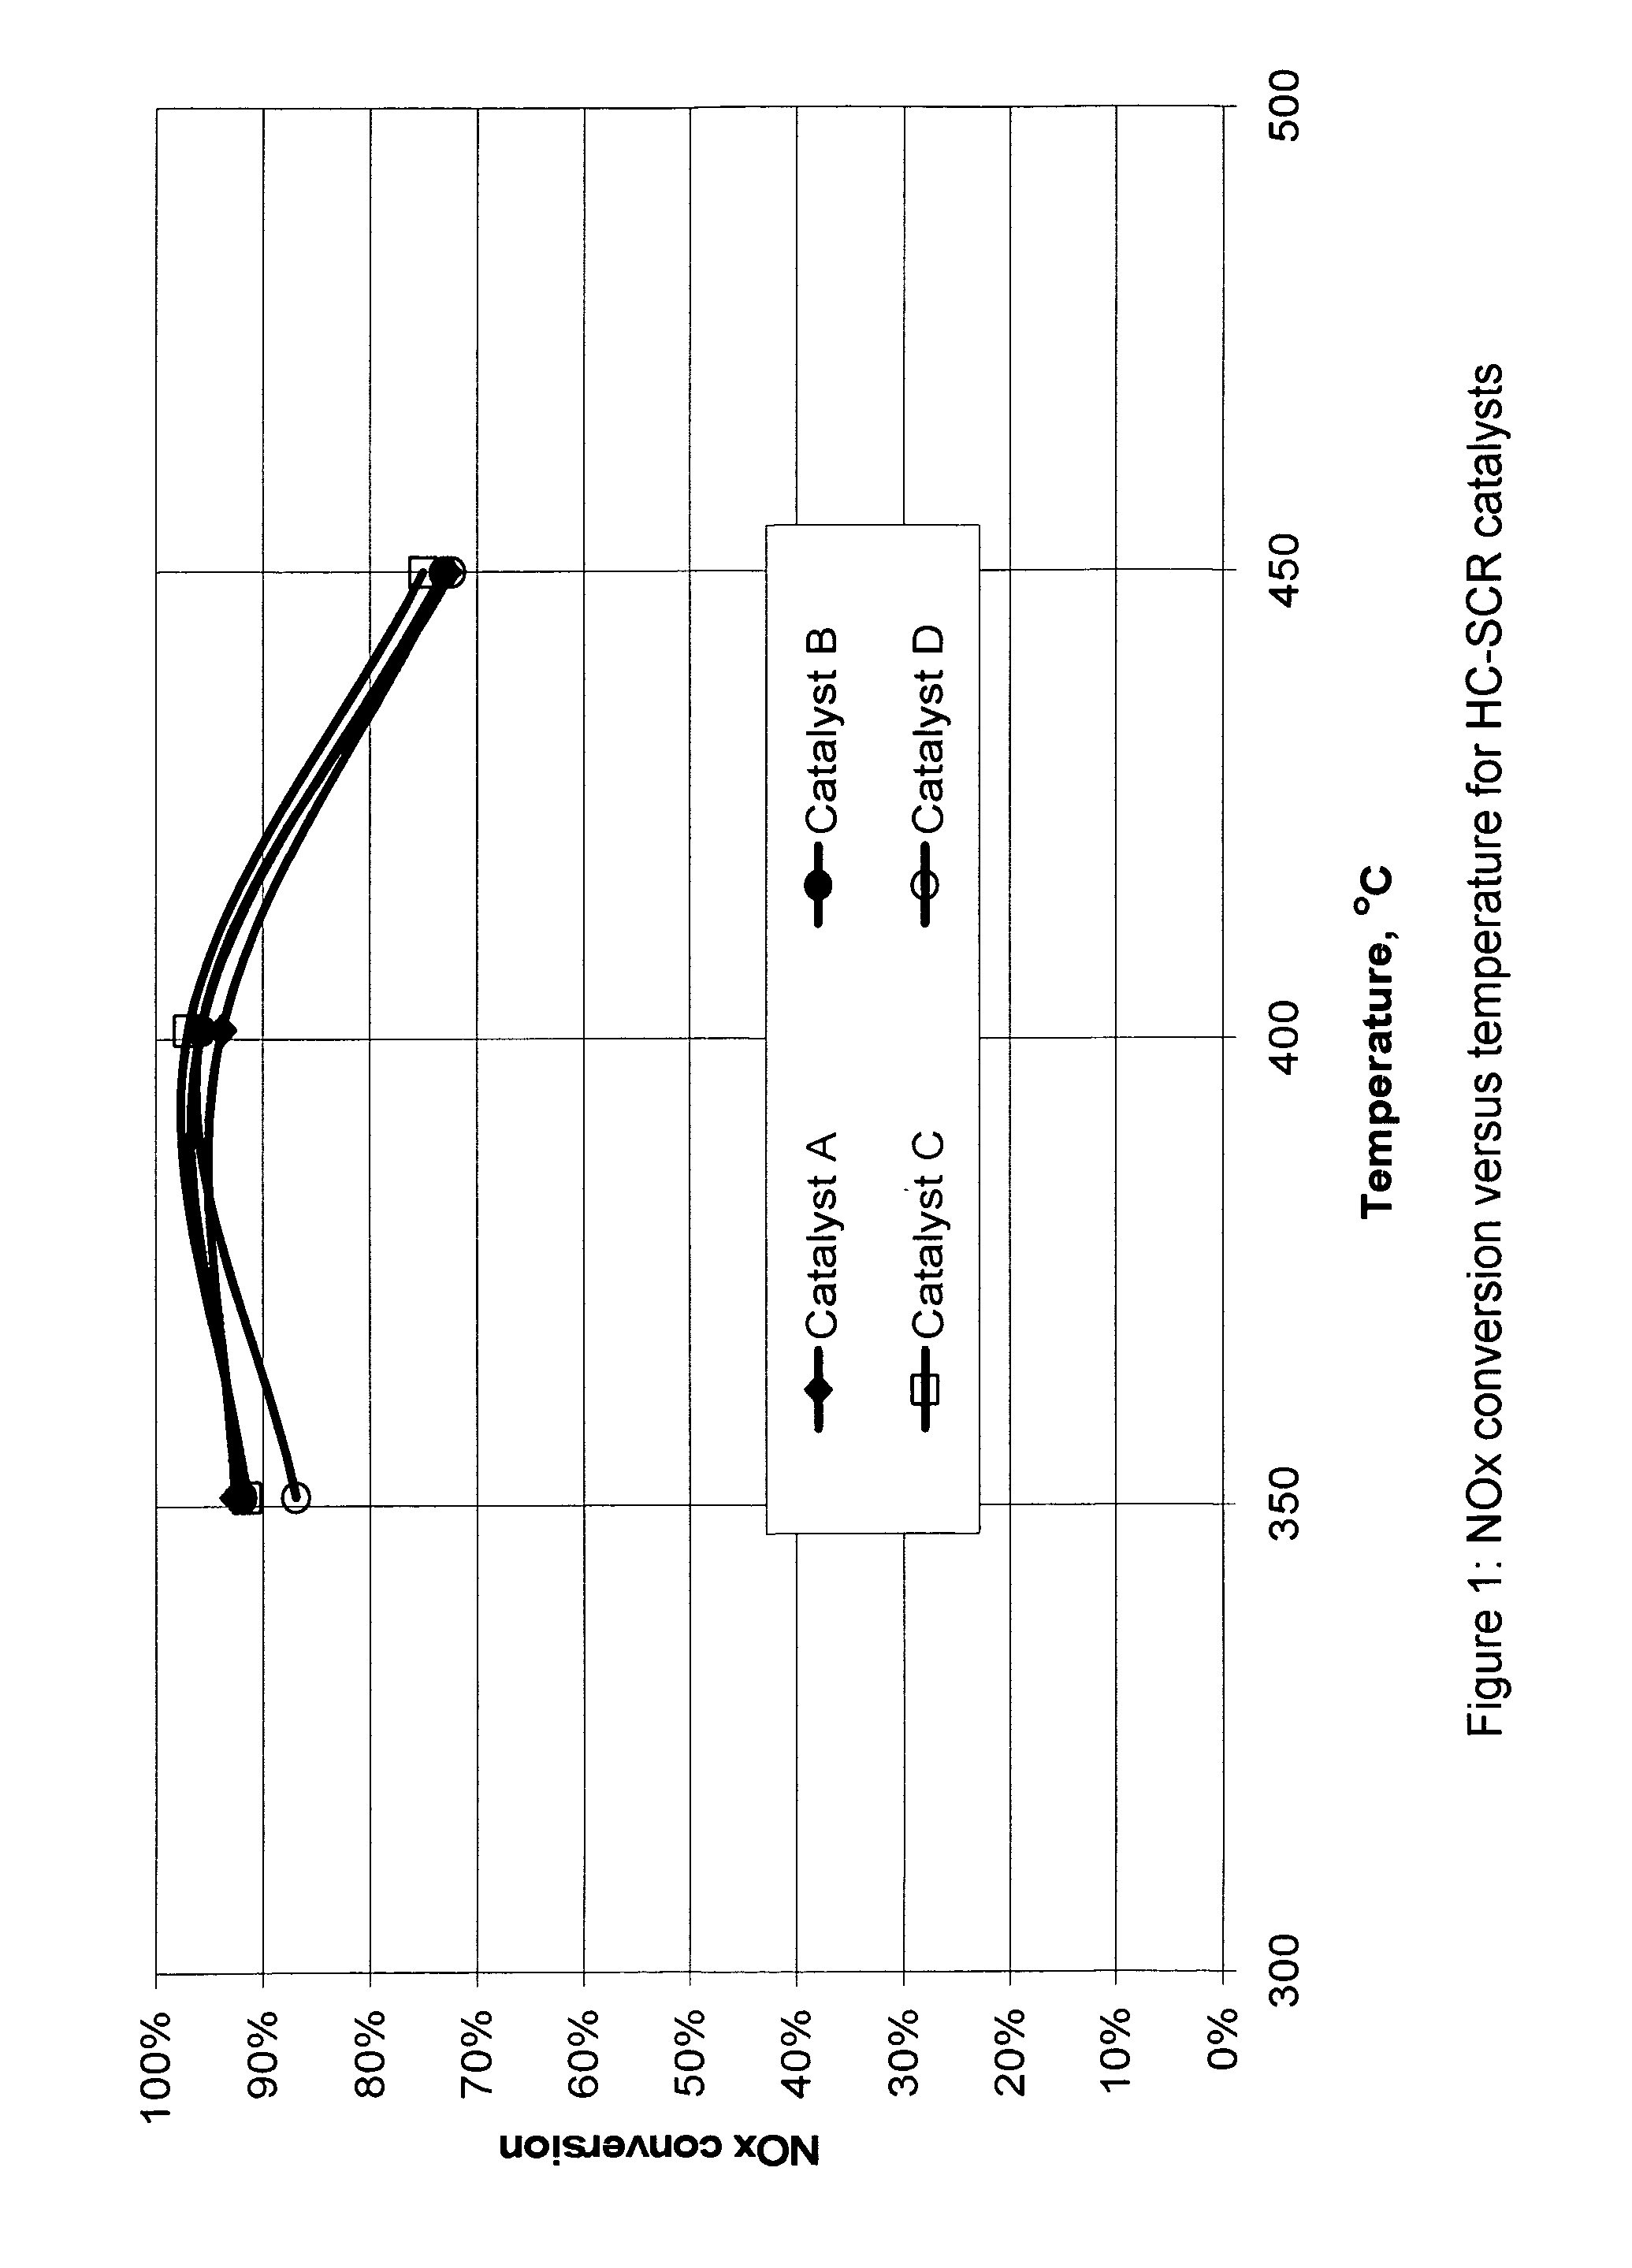 Emission reduction method for use with a heat recovery steam generation system